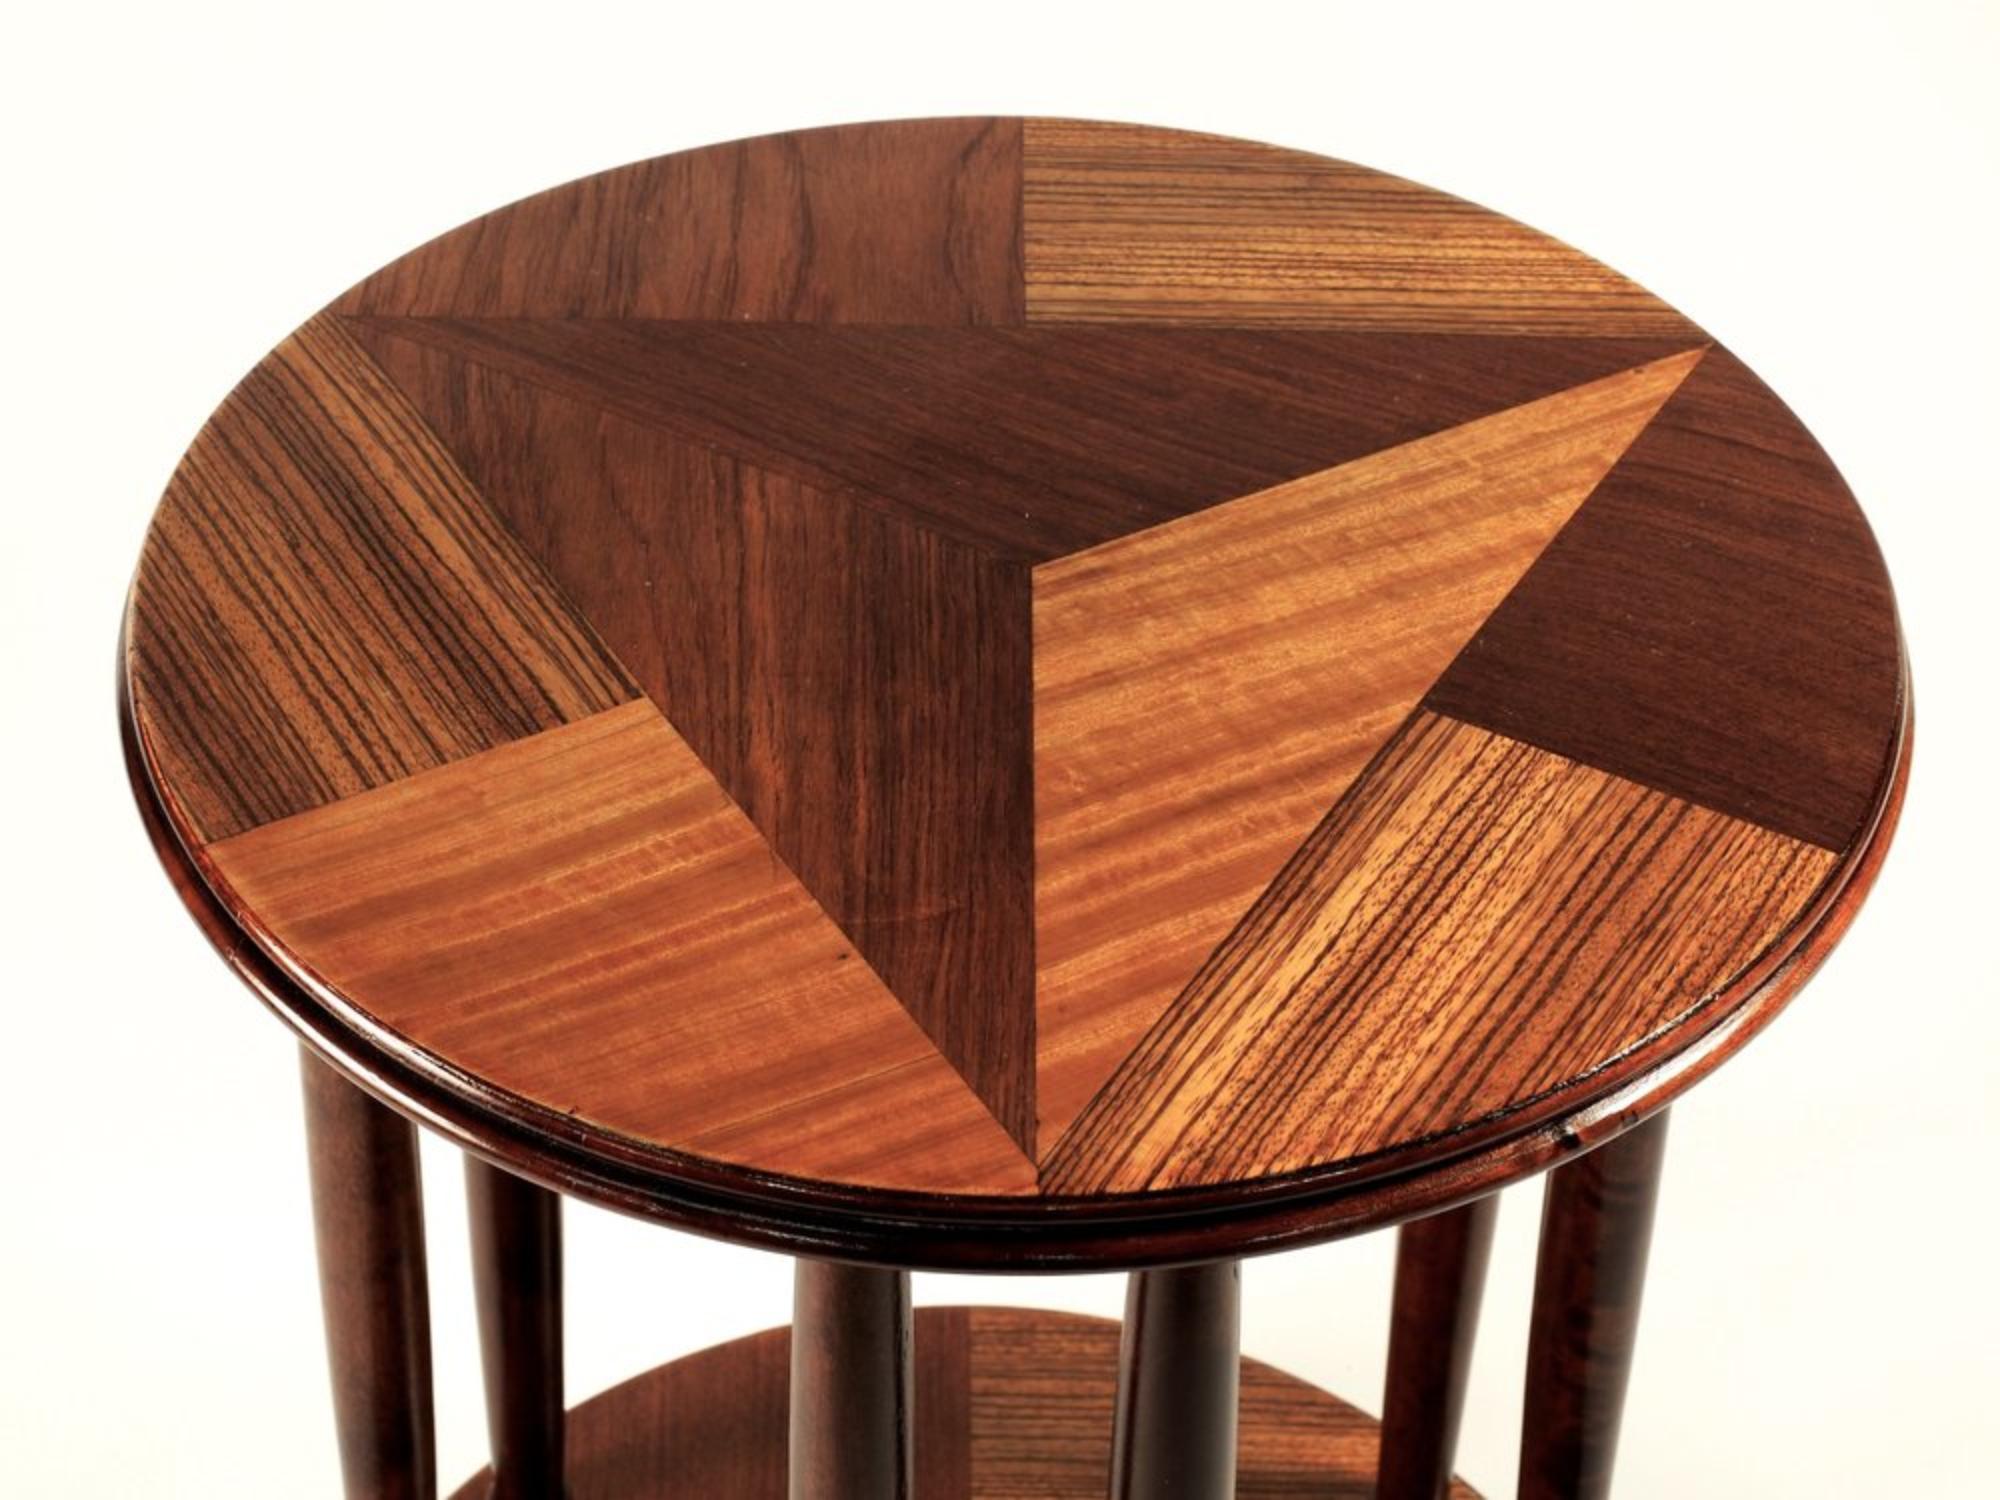 French Modernist Art Deco side table by Andre Groult, circa 1930, with Cubist marquetry in a variety of exotic hardwoods. 17